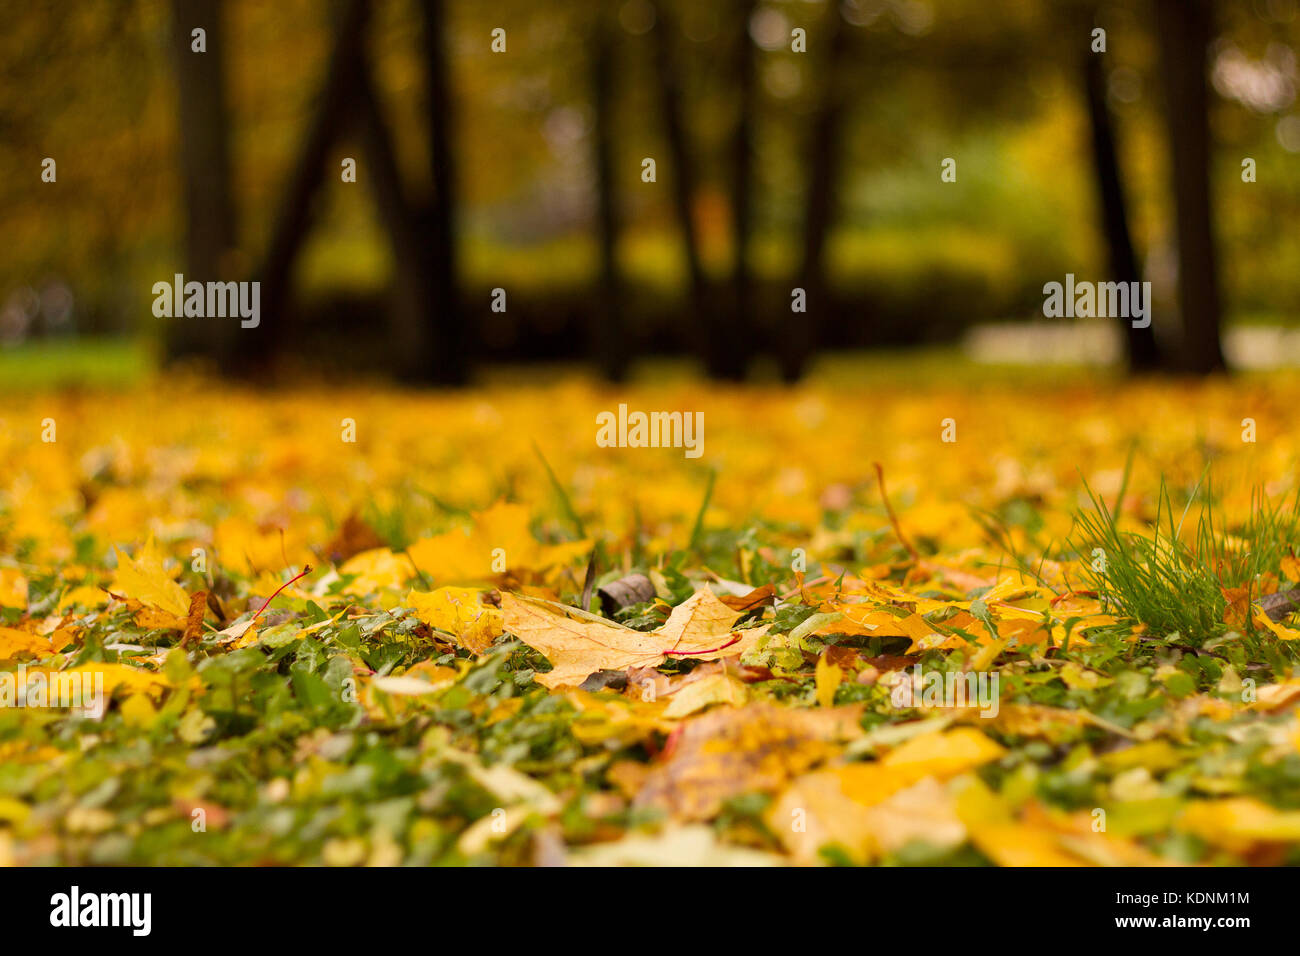 Yellow maple foliage covering grass at a glade in a park by an autumn day with blurred tree trunks as a background. Stock Photo